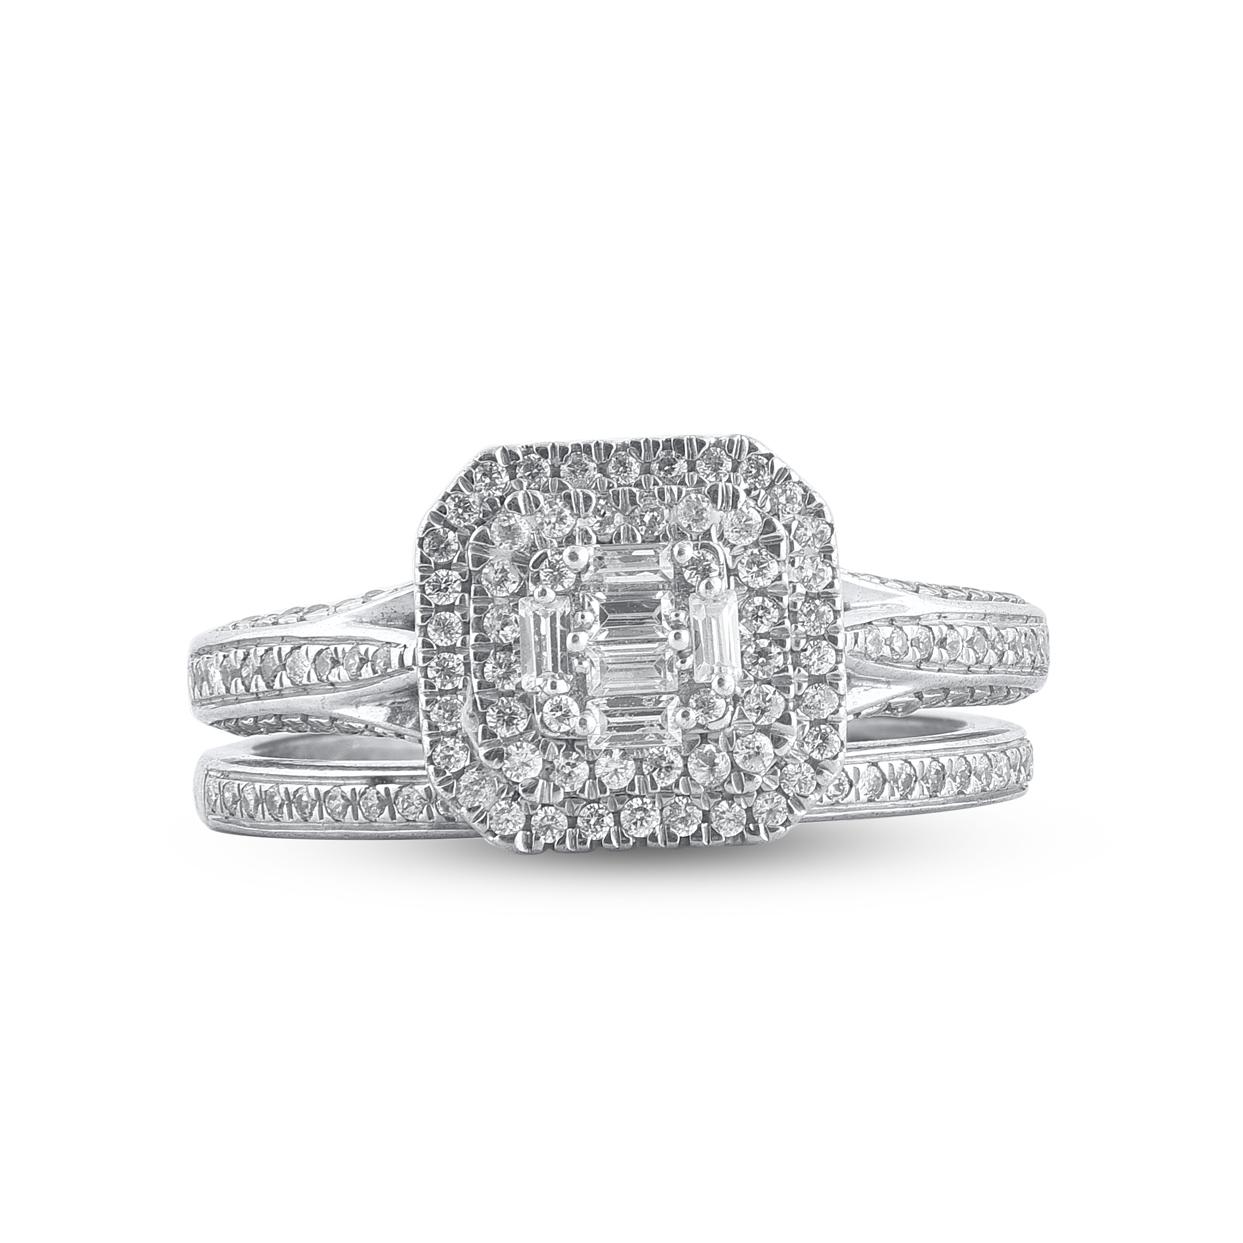 This bridal set is sure to impress her. Crafted in 14 Karat white gold. This wedding ring features a sparkling 140 single cut round diamonds and baguette cut diamonds beautifully set in prong setting. The total diamond weight is 0.62 Carat. The